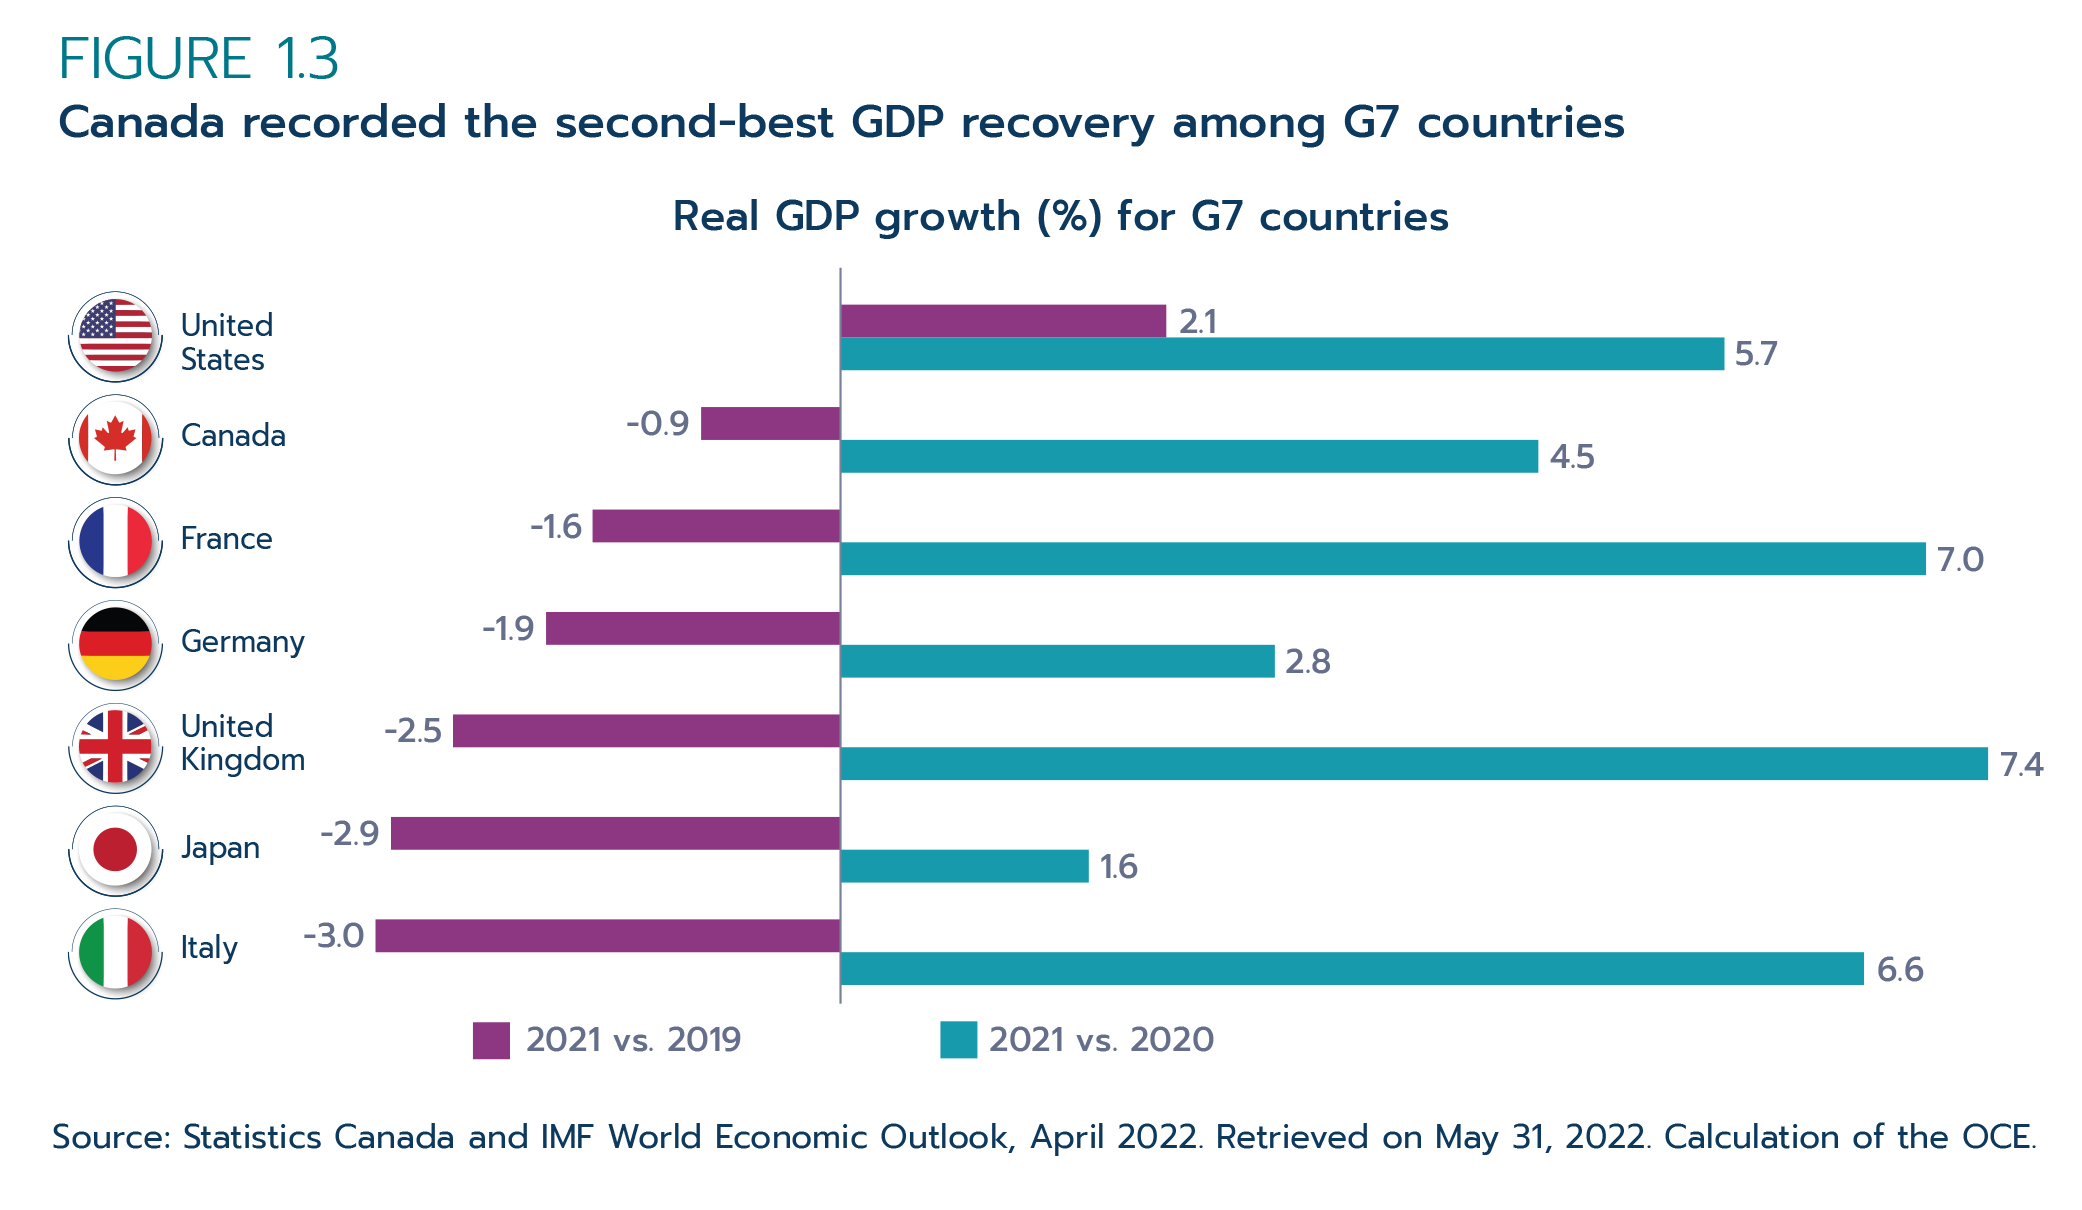 Figure 1.3: Canada recorded the second-best GDP recovery among G7 countries